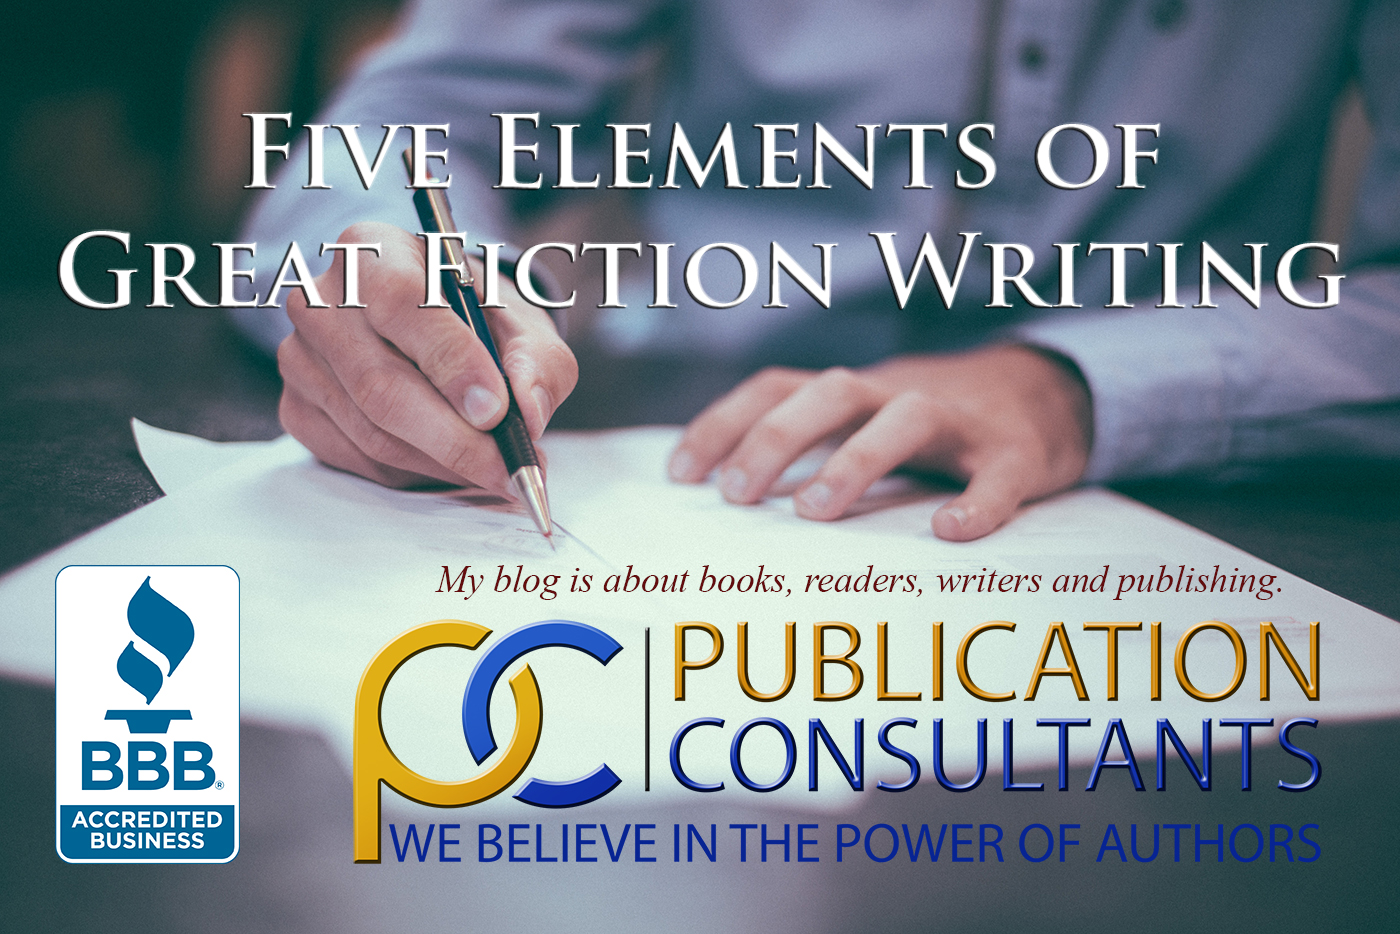 Five Elements of Great Fiction Writing